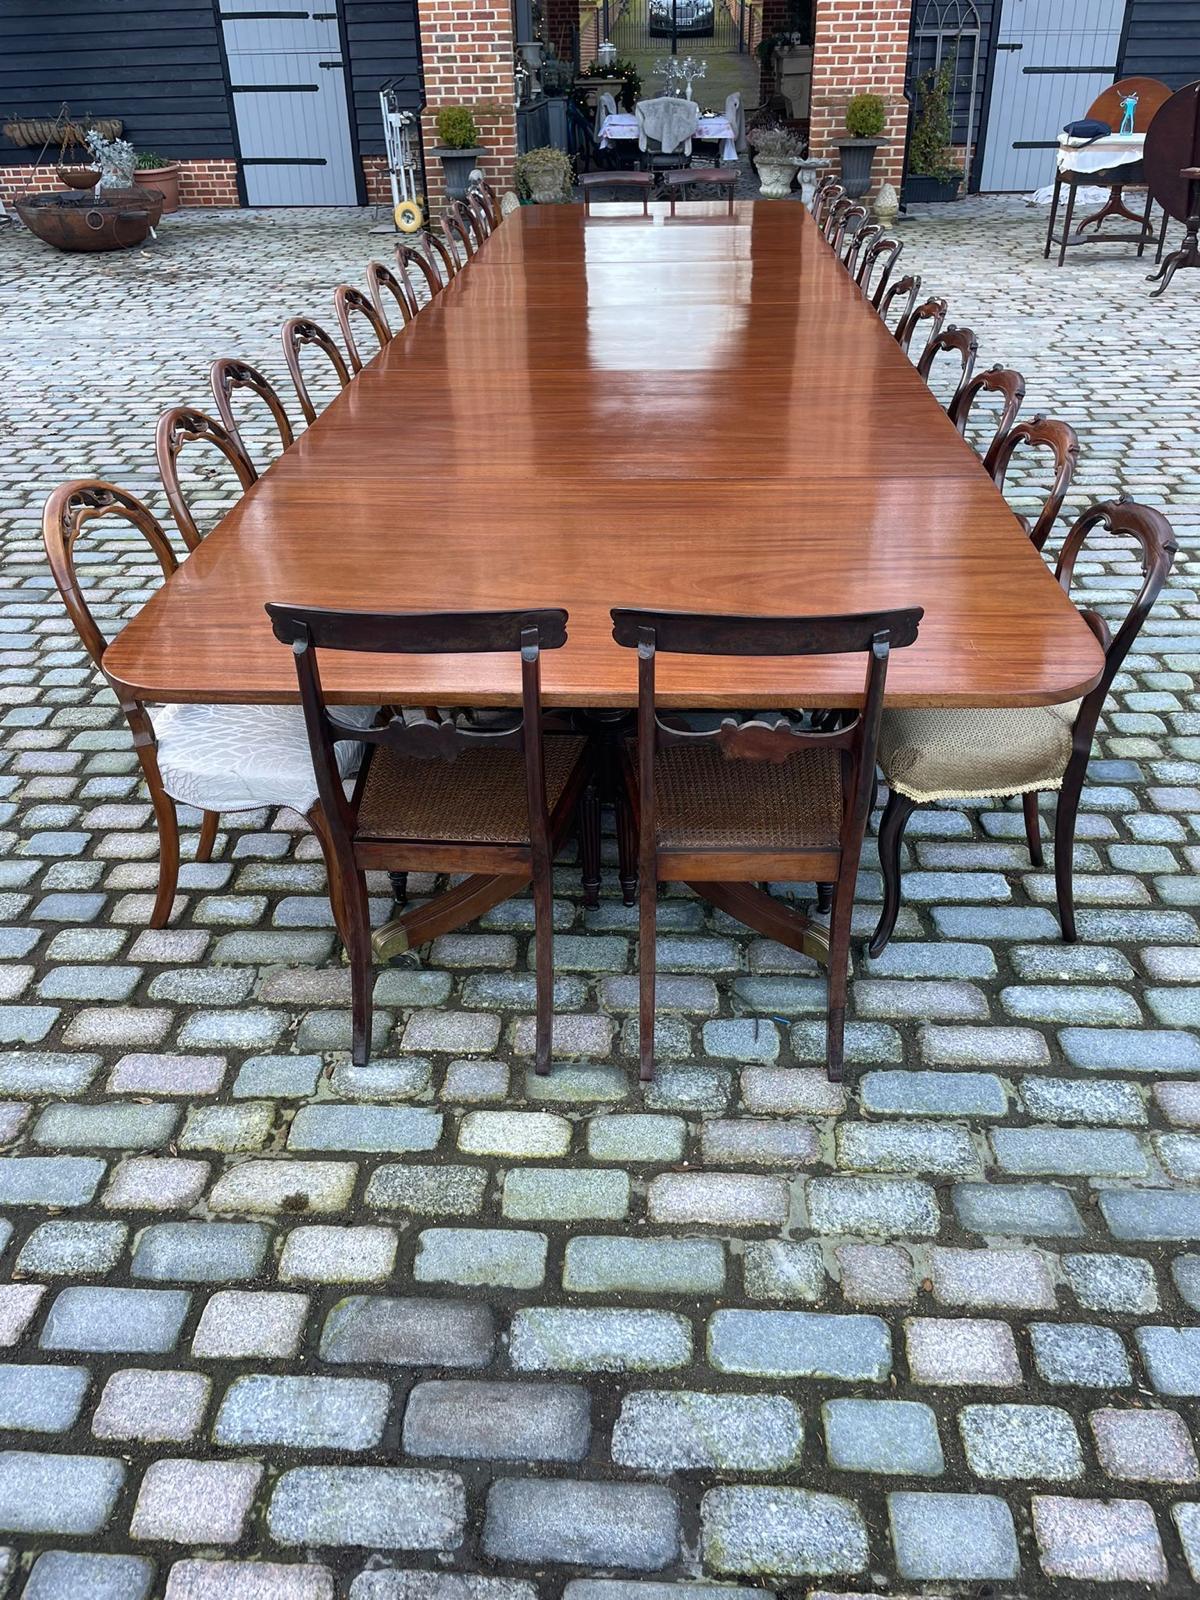 Rare 28 seater 6 pilar Antique Quality Mahogany Dining Table 72 x 161 x 609 cm For Sale 13